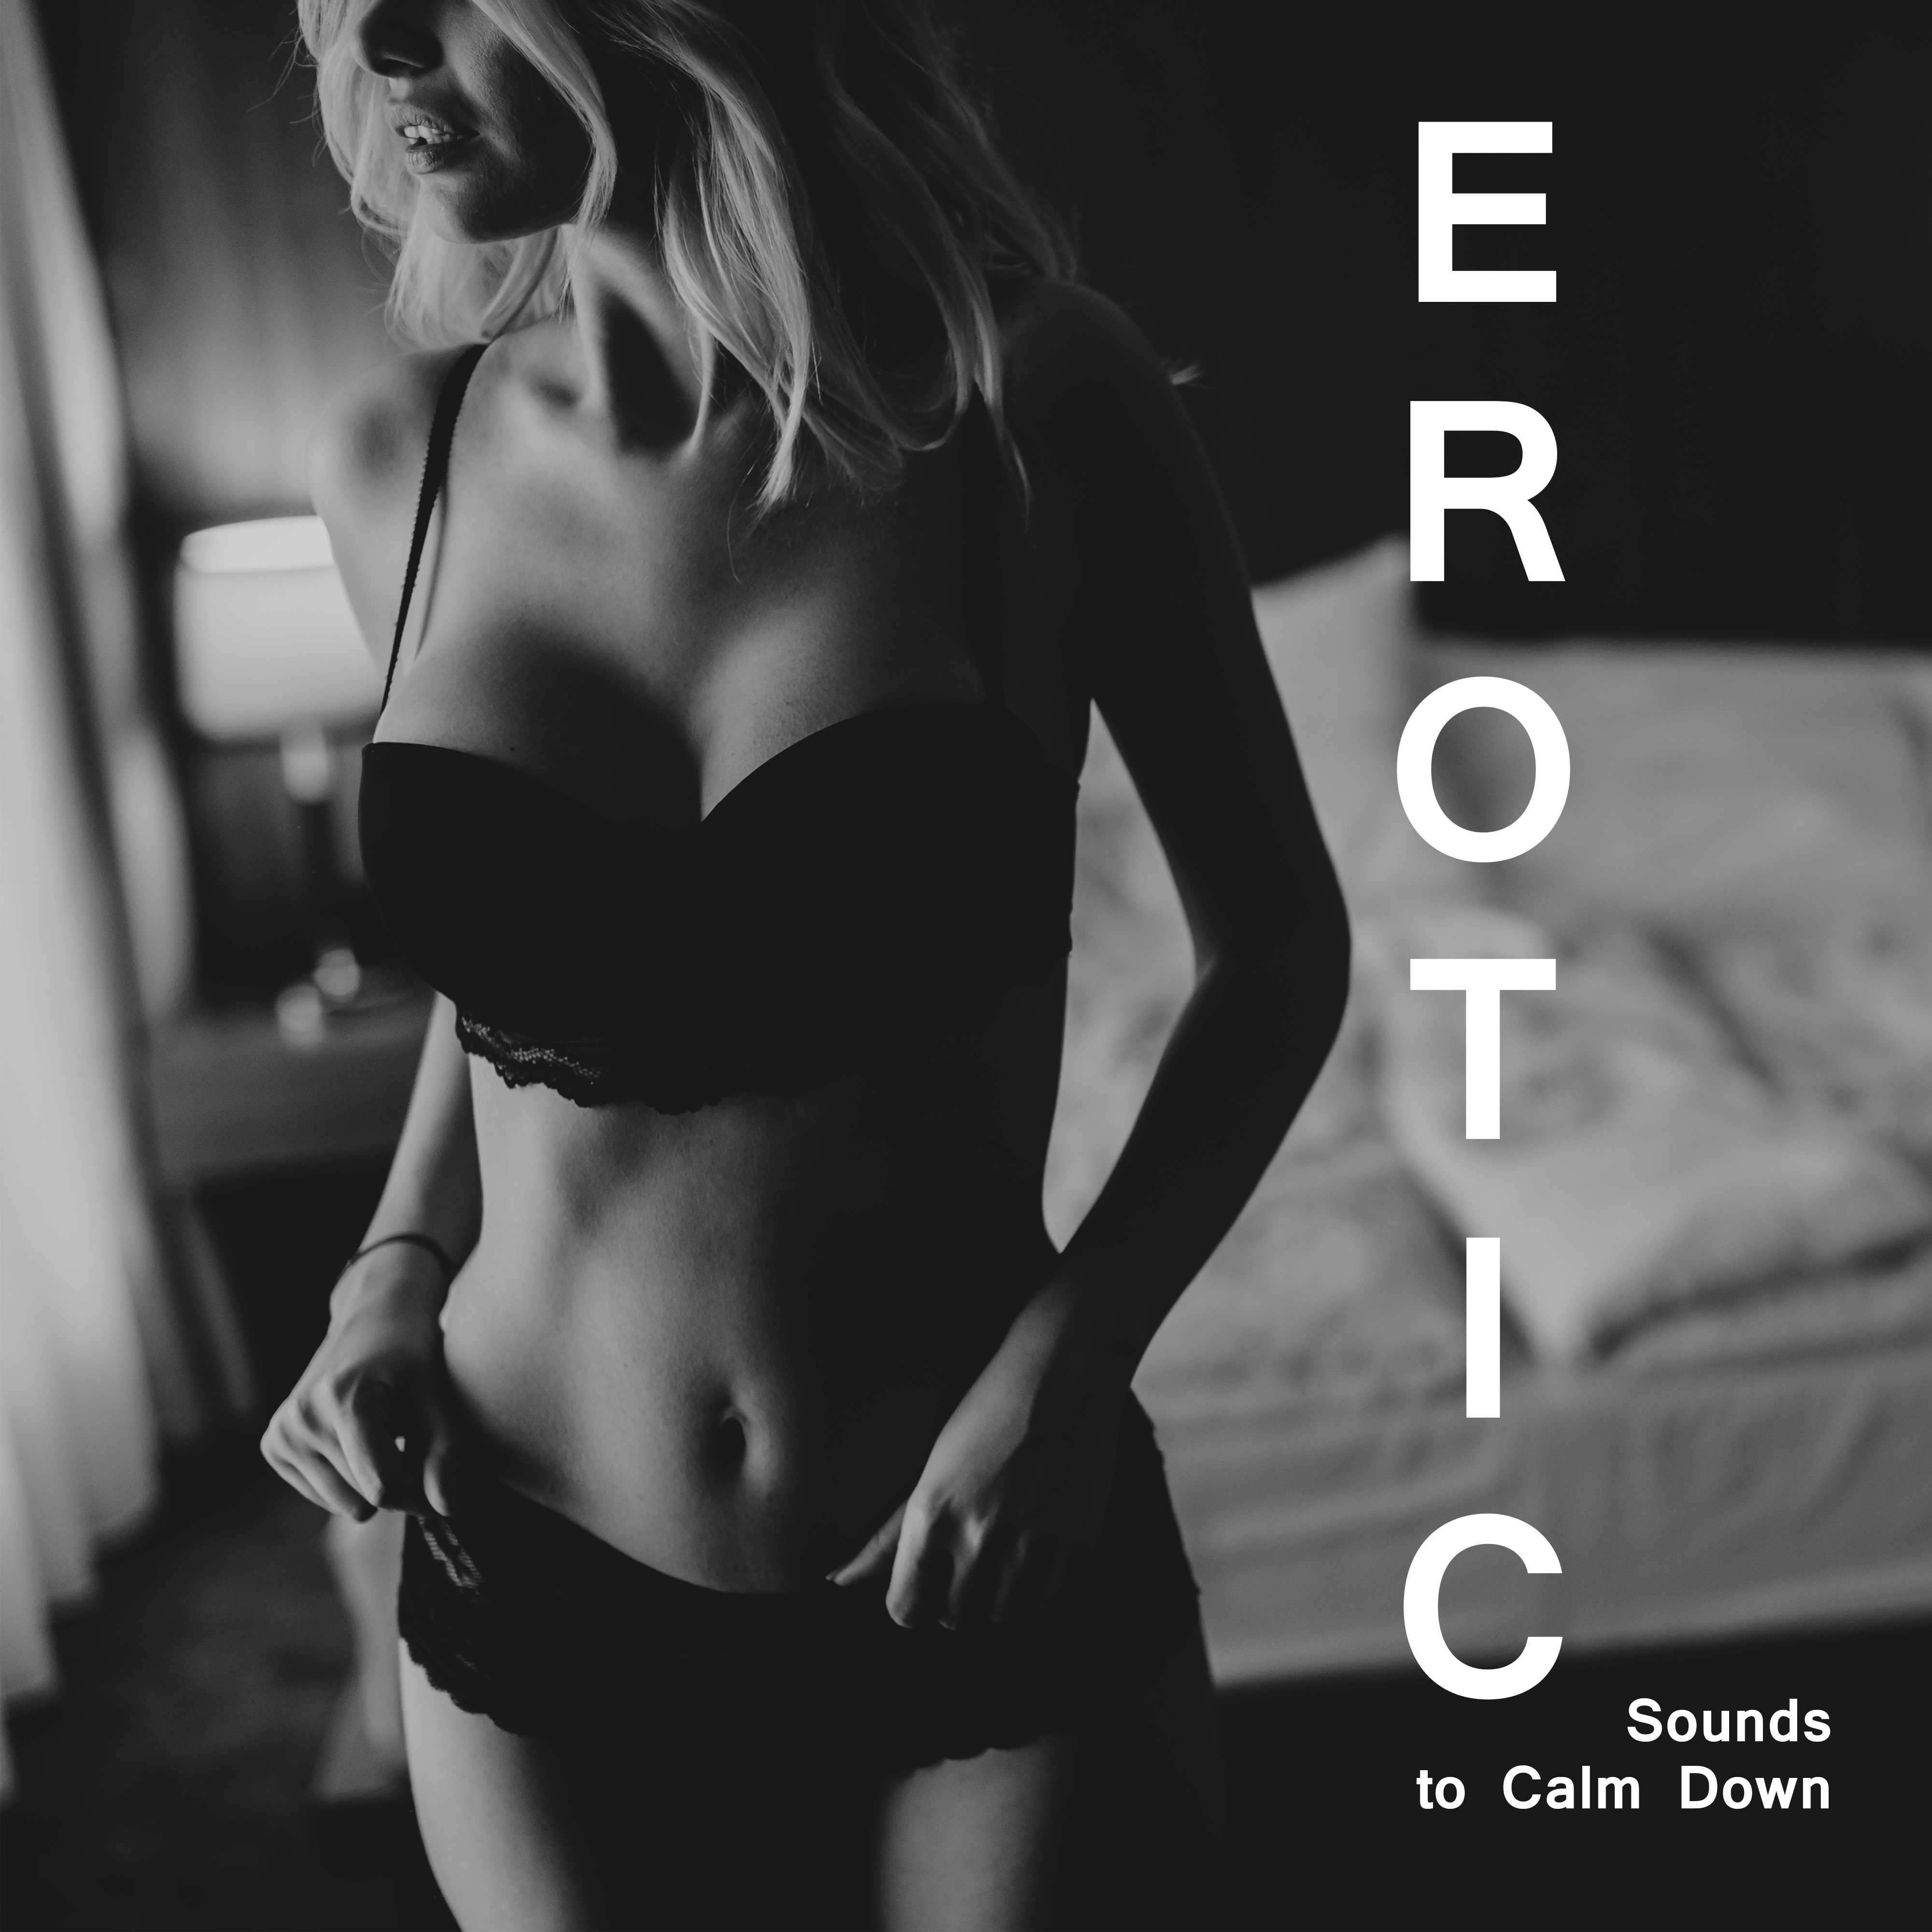 Erotic Sounds to Calm Down